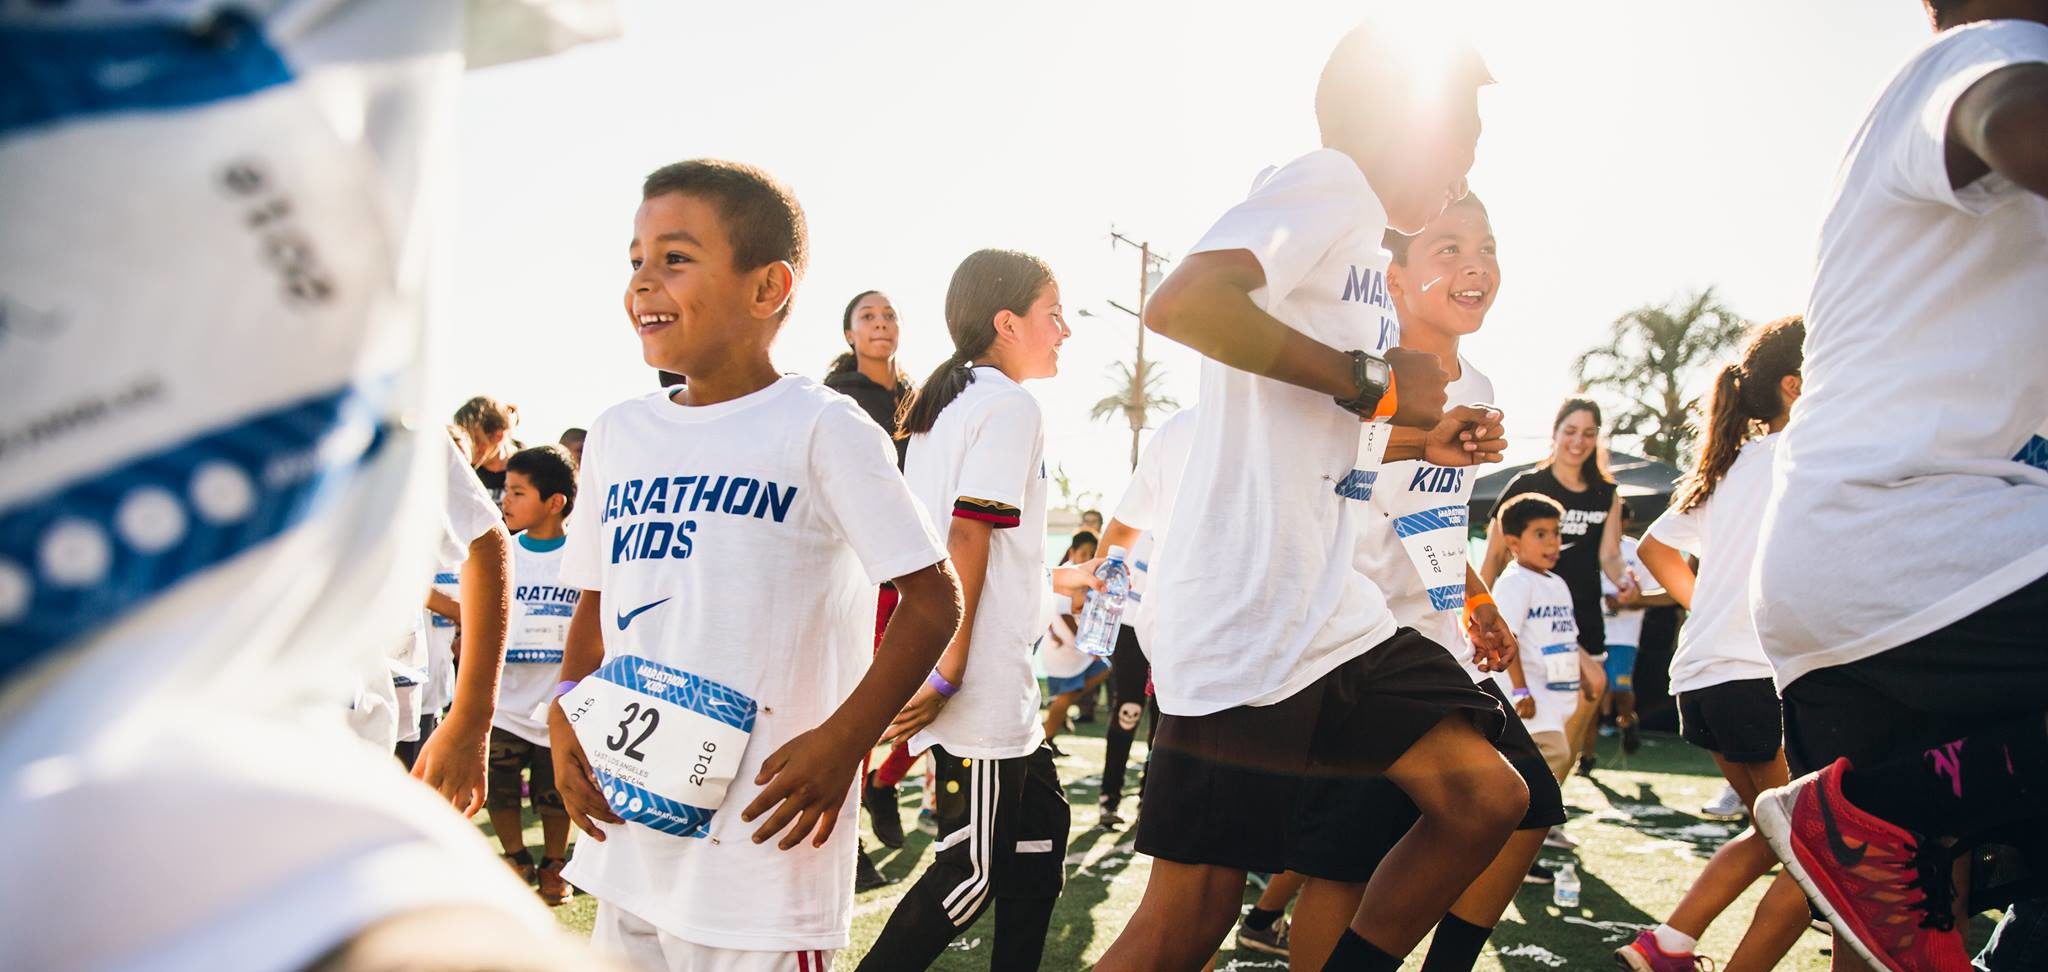 Marathon Kids is on a mission to get kids moving.